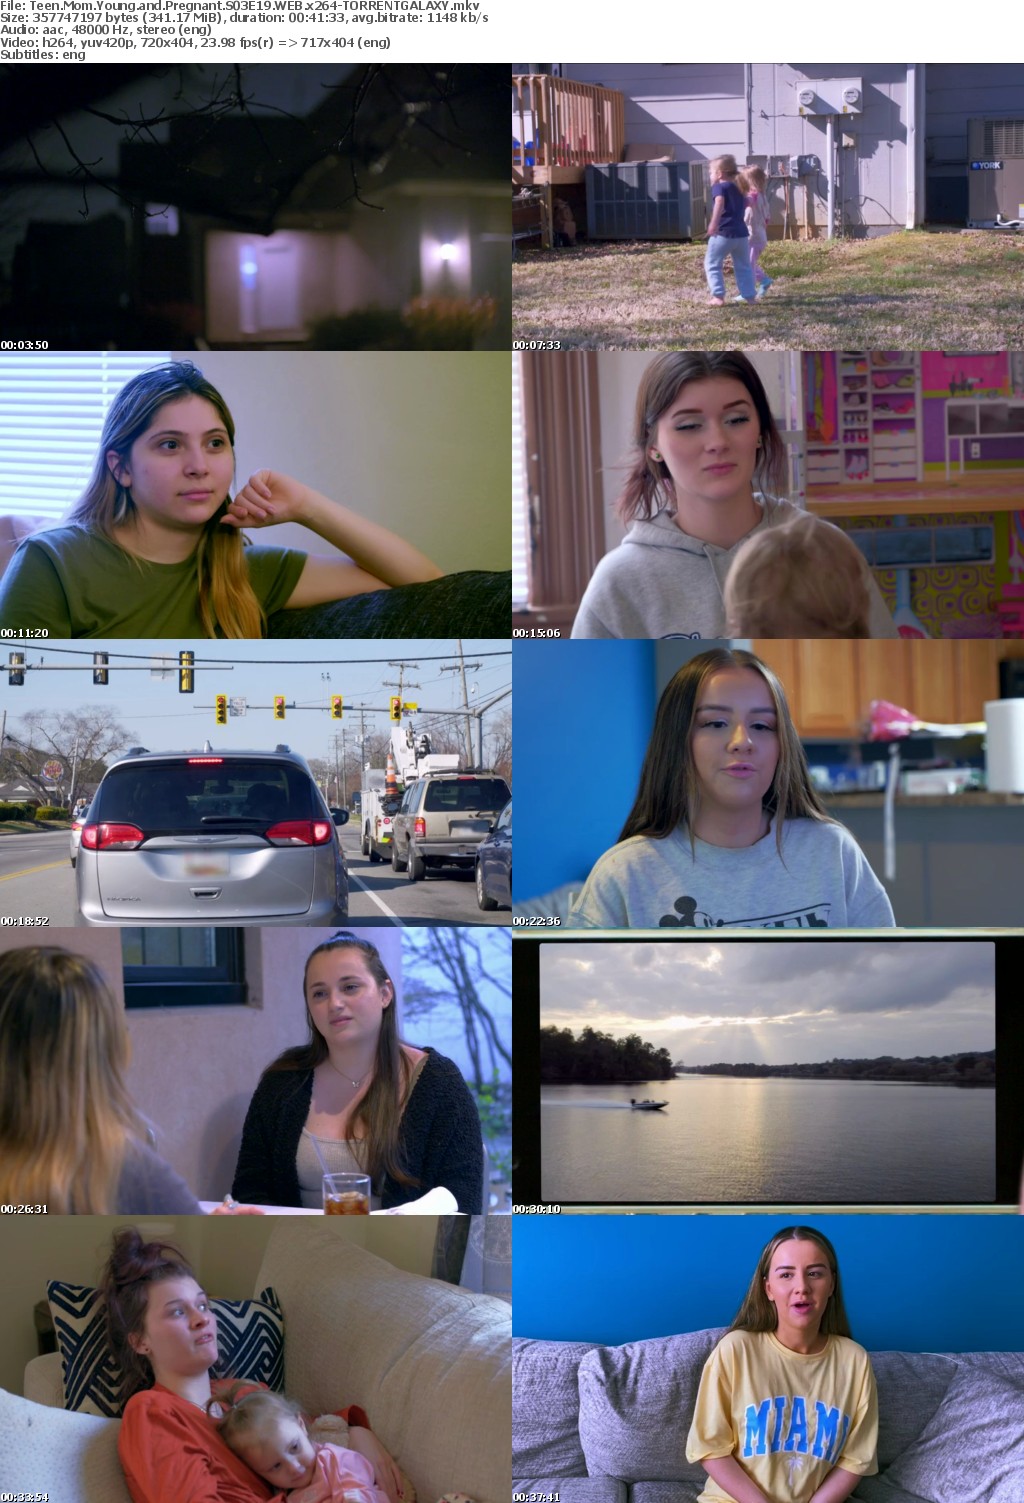 Teen Mom Young and Pregnant S03E19 WEB x264-GALAXY